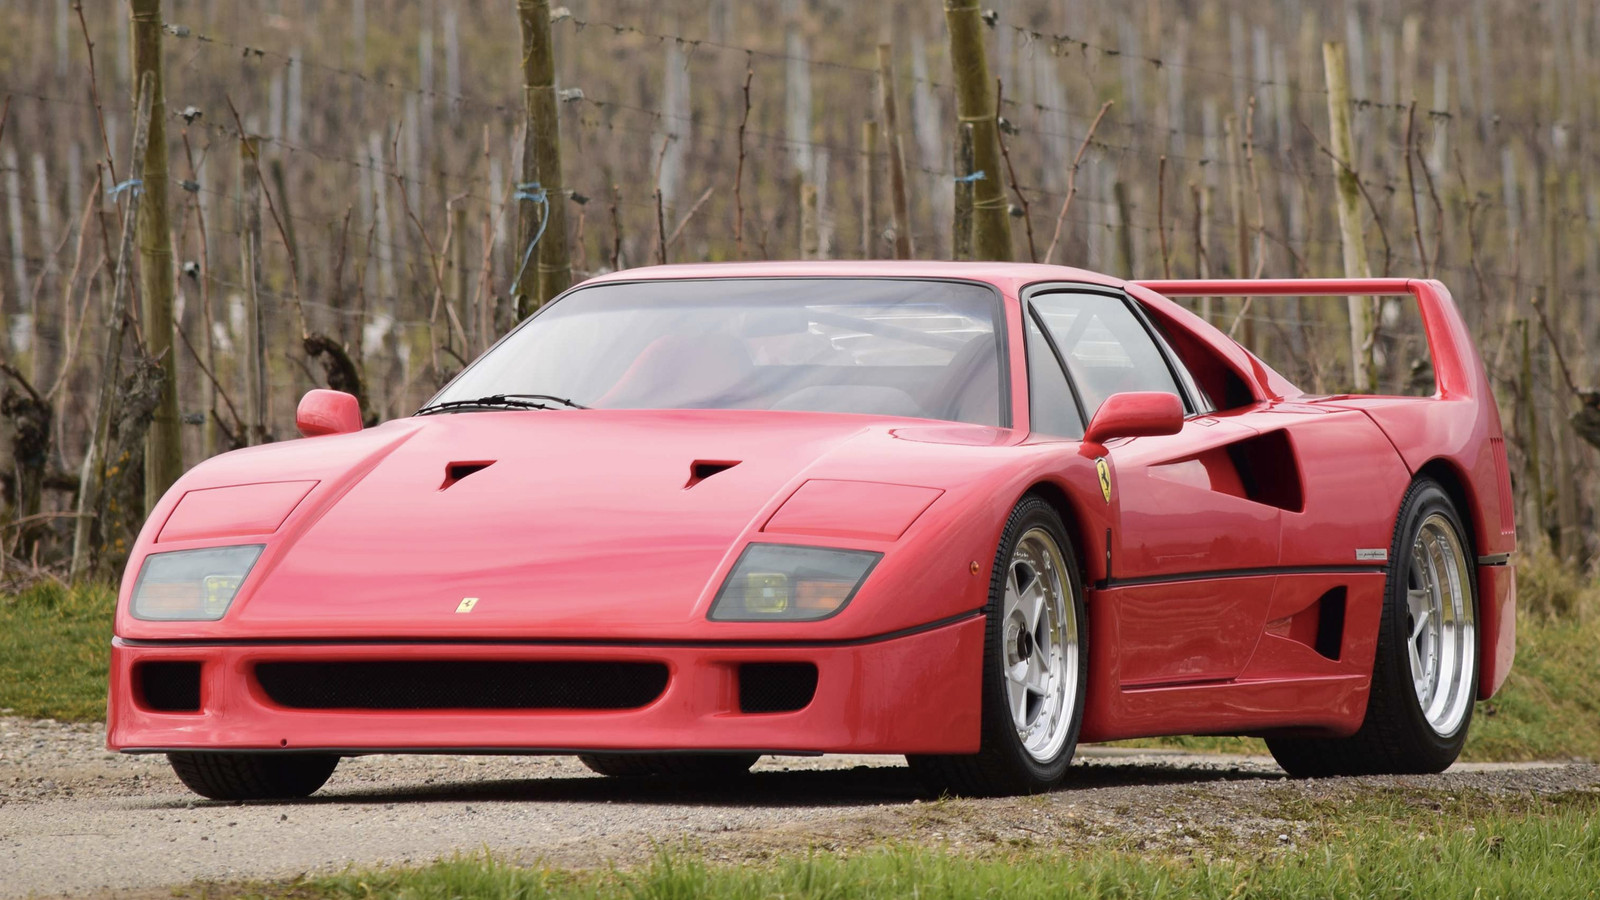 Flawless F40 up for sale at Artcurial’s April auction | Classic ...